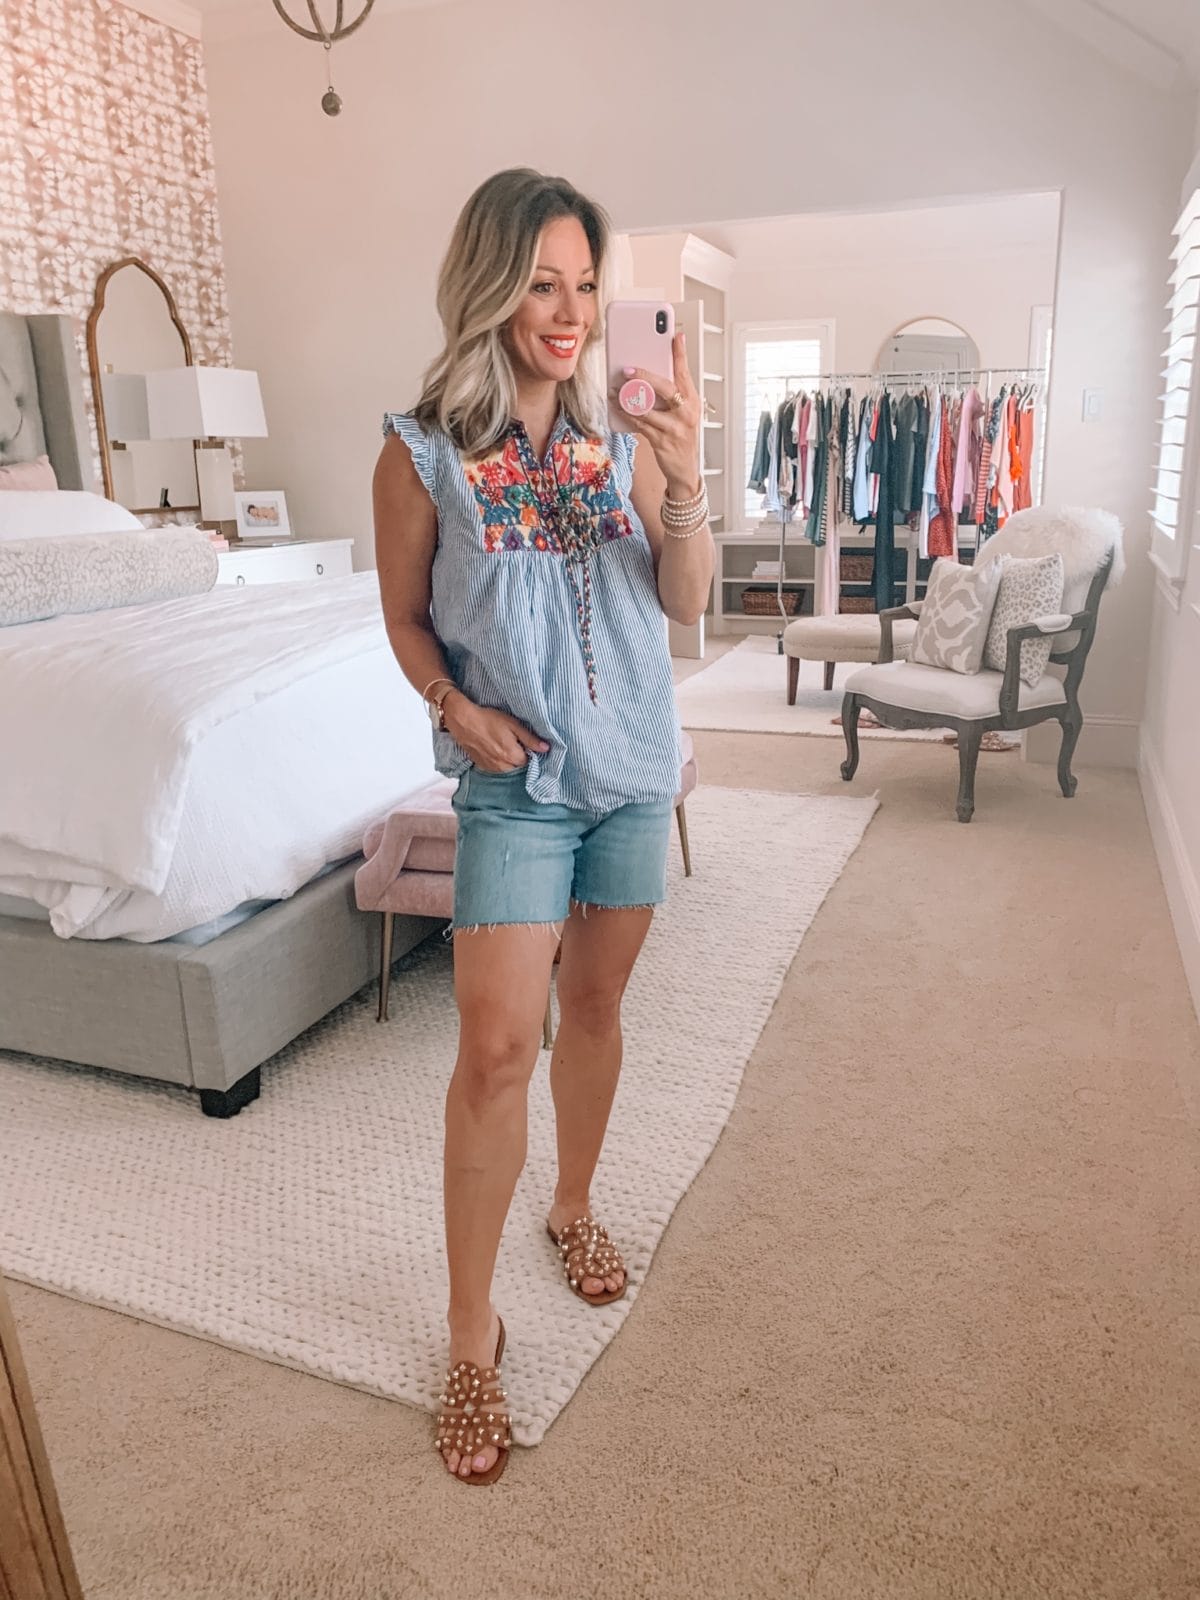 Amazon Fashion Finds, Embroidered Top, Jeans Shorts, Studded Sandals